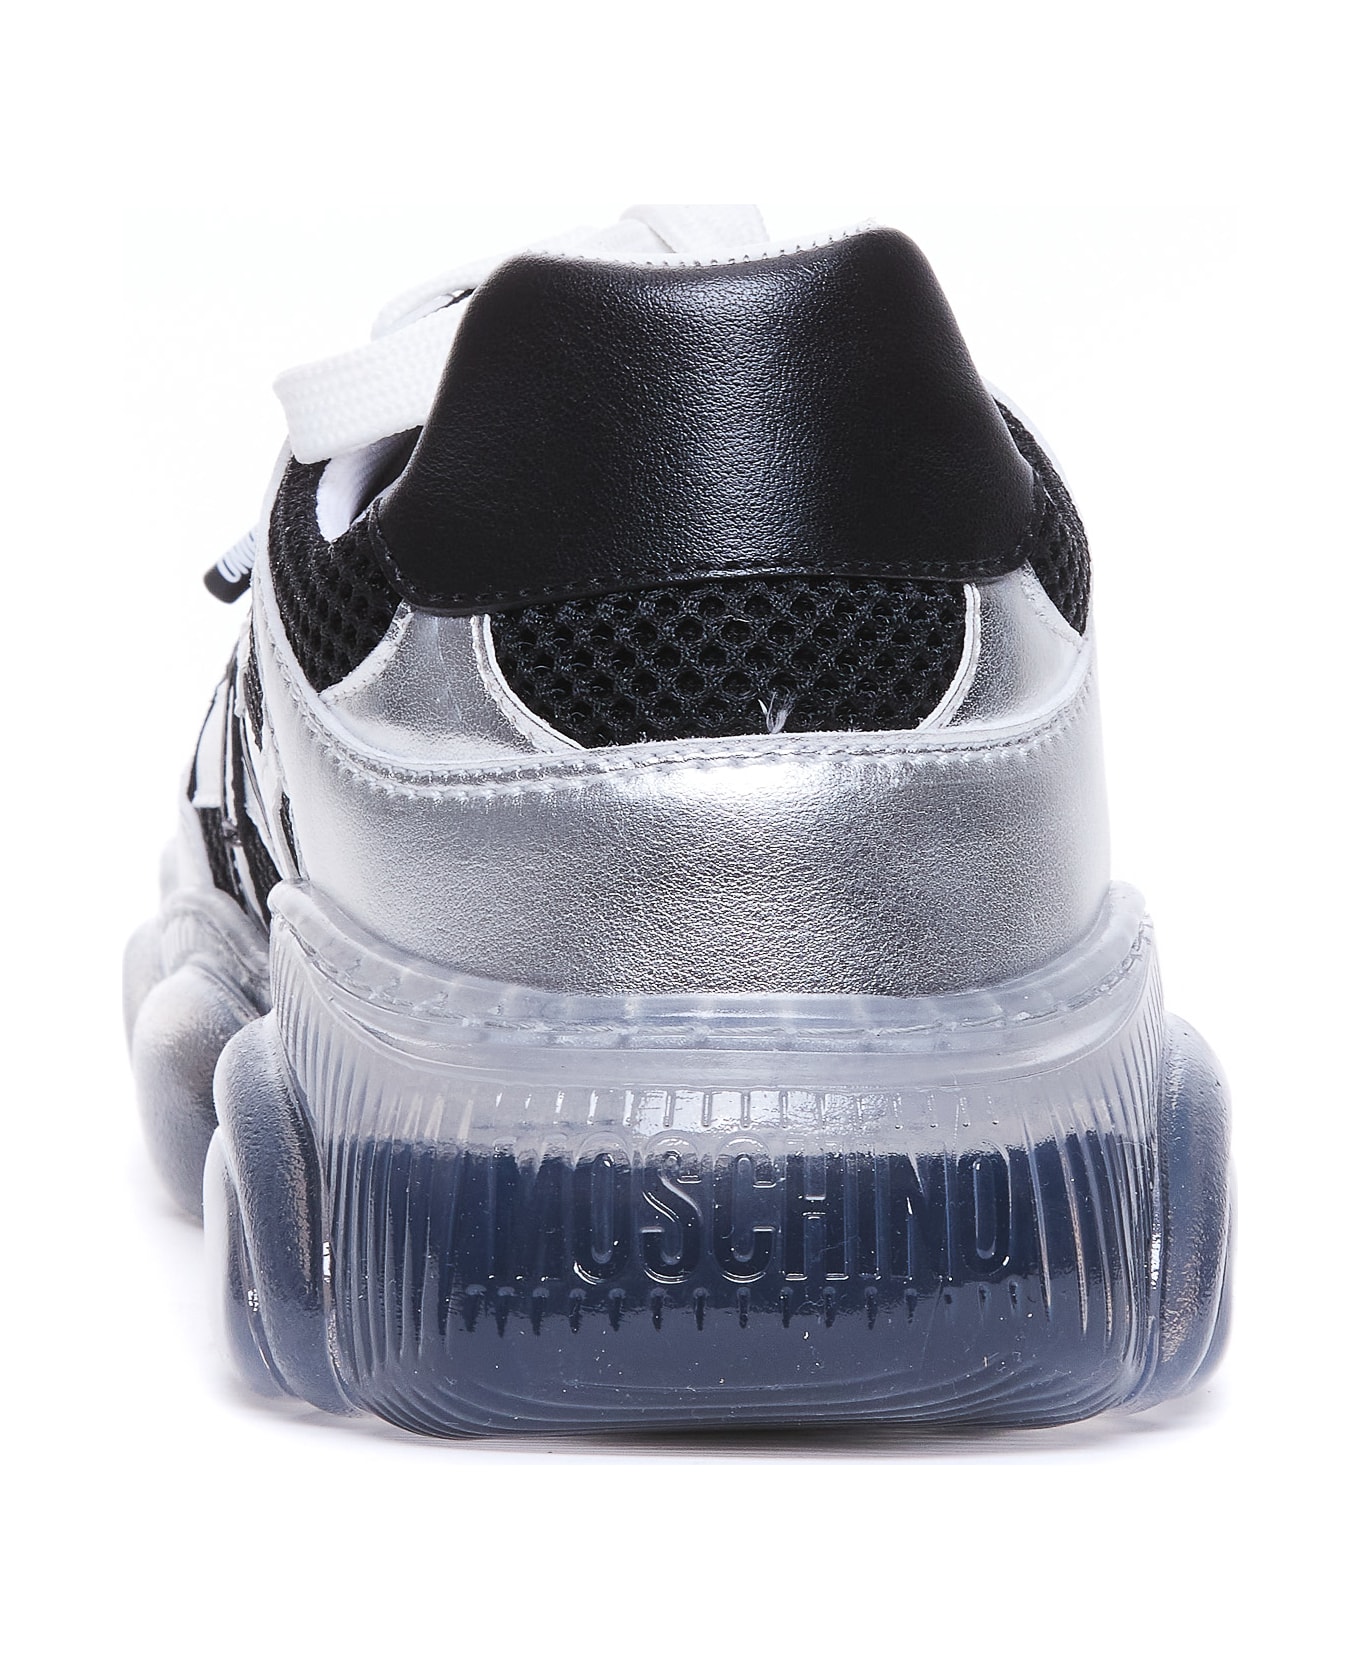 Moschino Teddy Shoes With Transparent Sole